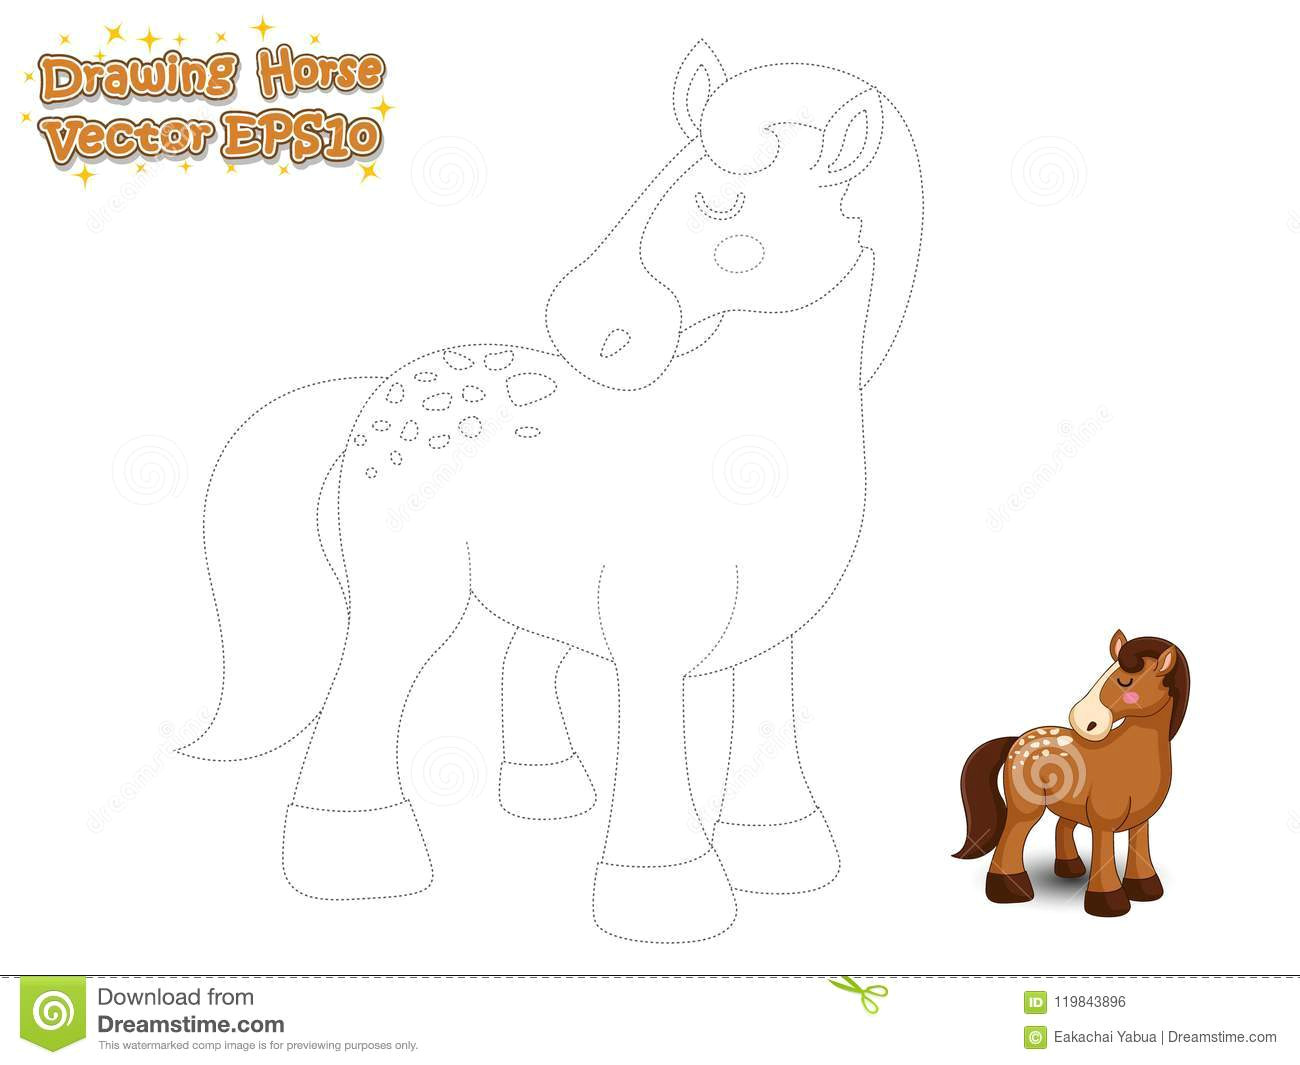 Drawing Cute Horses Drawing and Paint Cute Horse Cartoon Educational Game for Kids